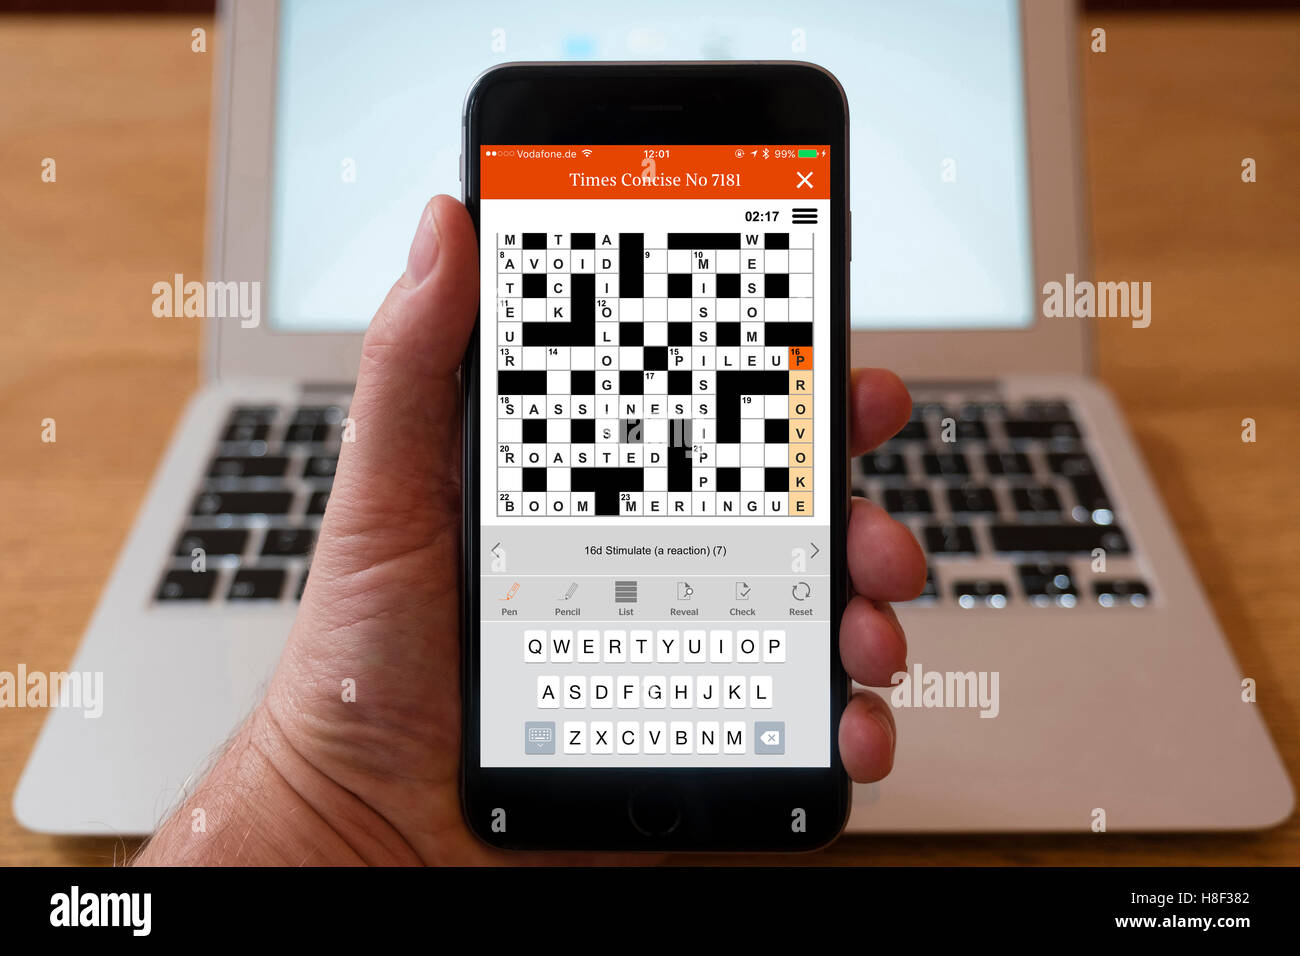 Detail of The Time crossword puzzle being solved on a smart phone Stock Photo